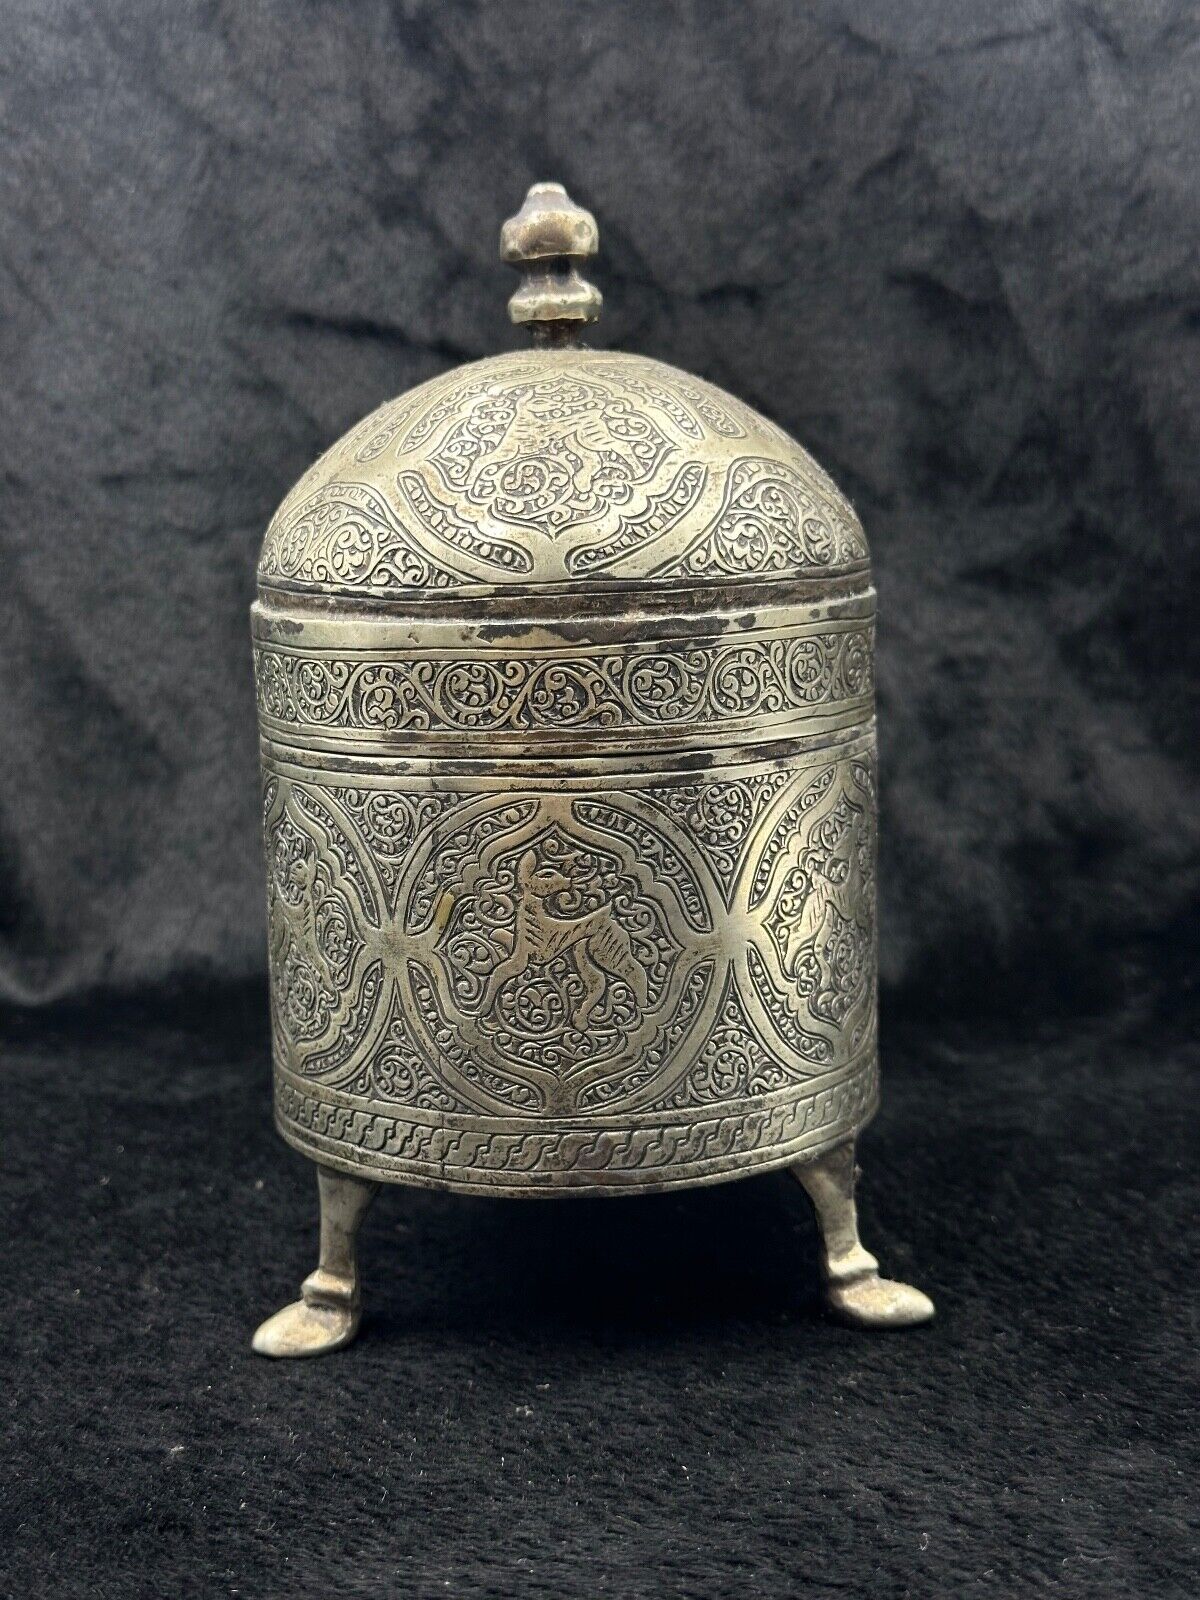 Antique Beautiful Art Rare White Metal Handmade Old Box From Afghanistan